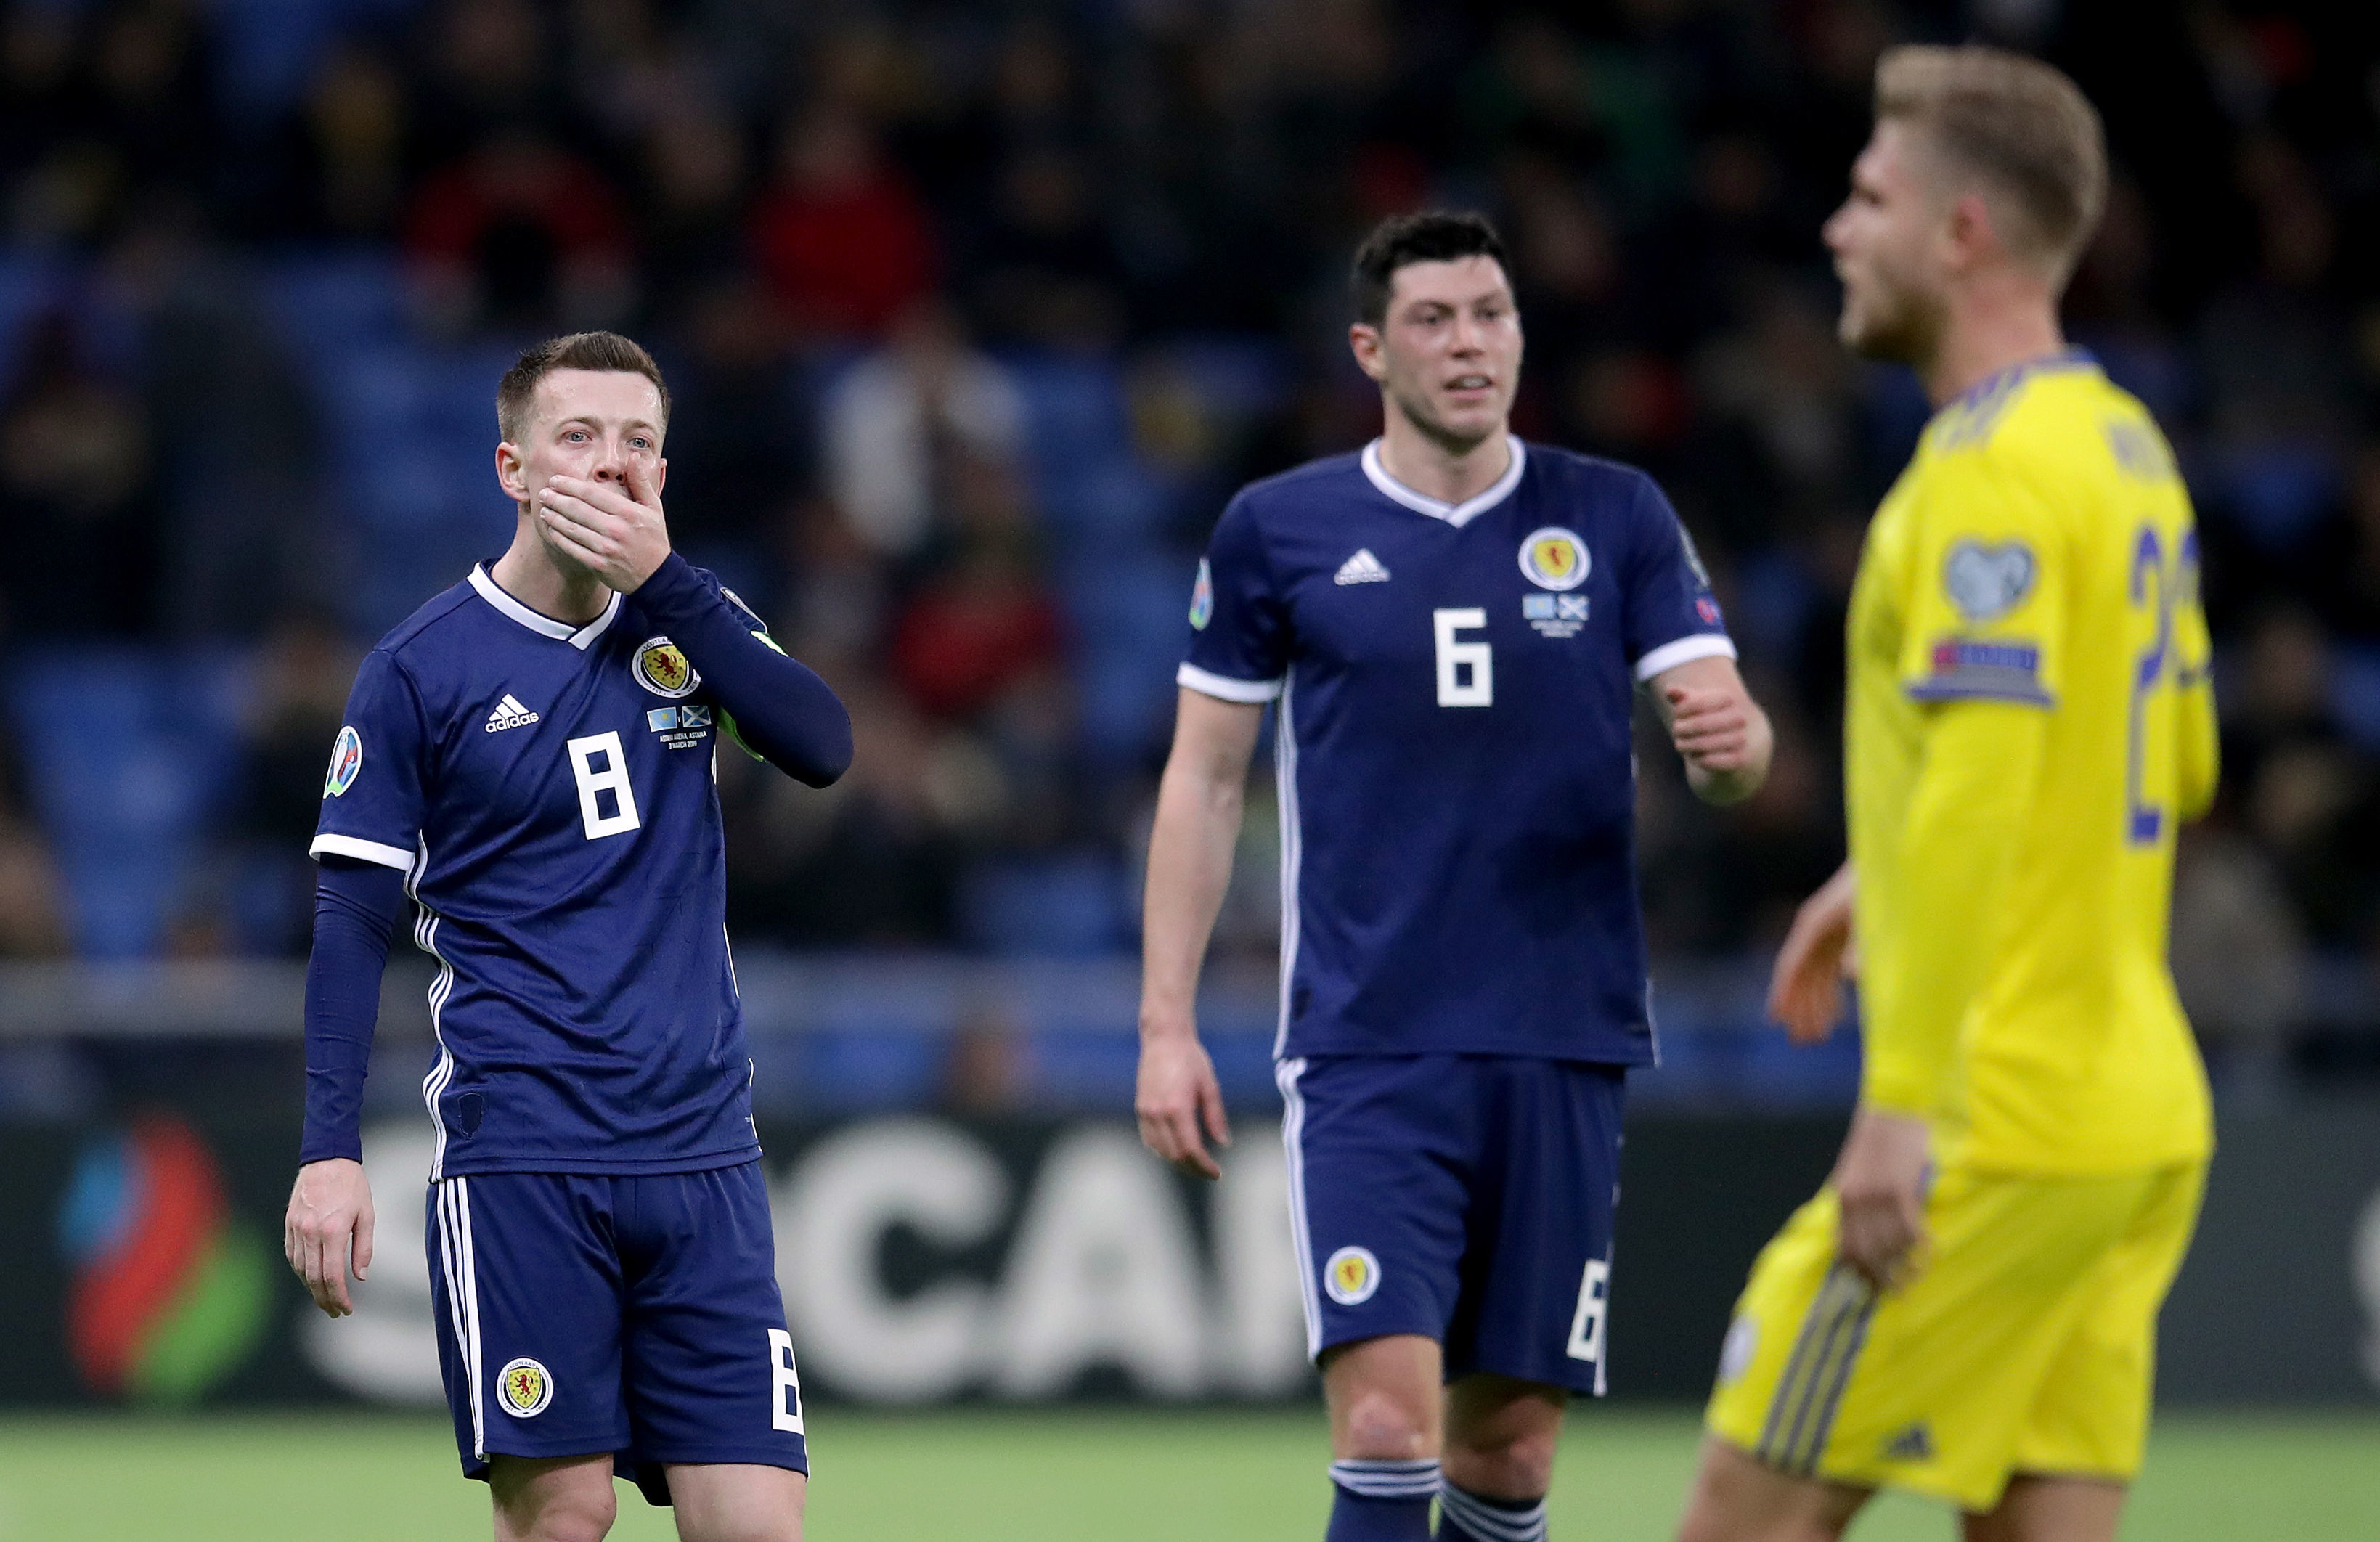 The faces say it all as Scotland capitulate in Kazakhstan.